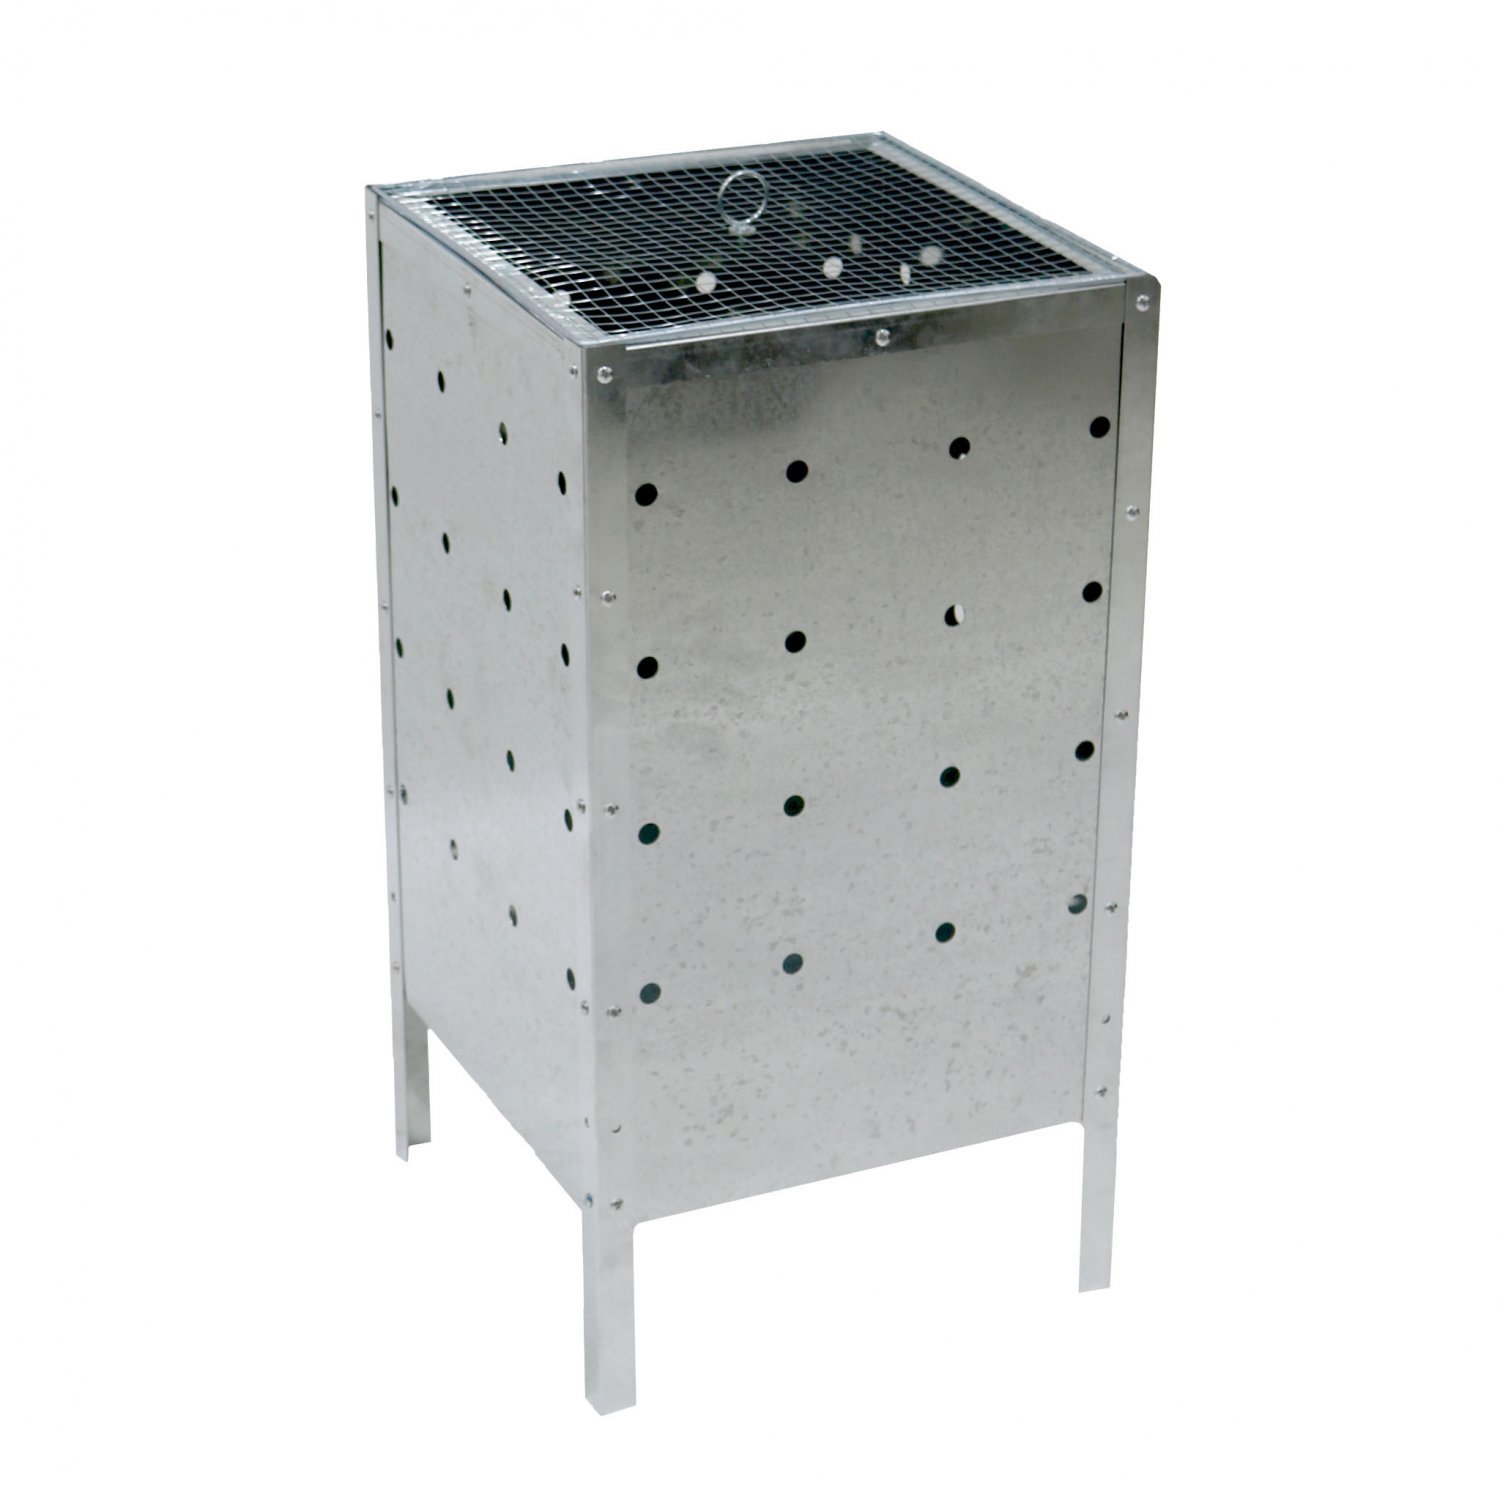 Galvanised Metal Material Quality Products by Denny International Large 90 Litre Square Incinerator Fire Bin Garden Rubbish Burning Trash Bins 